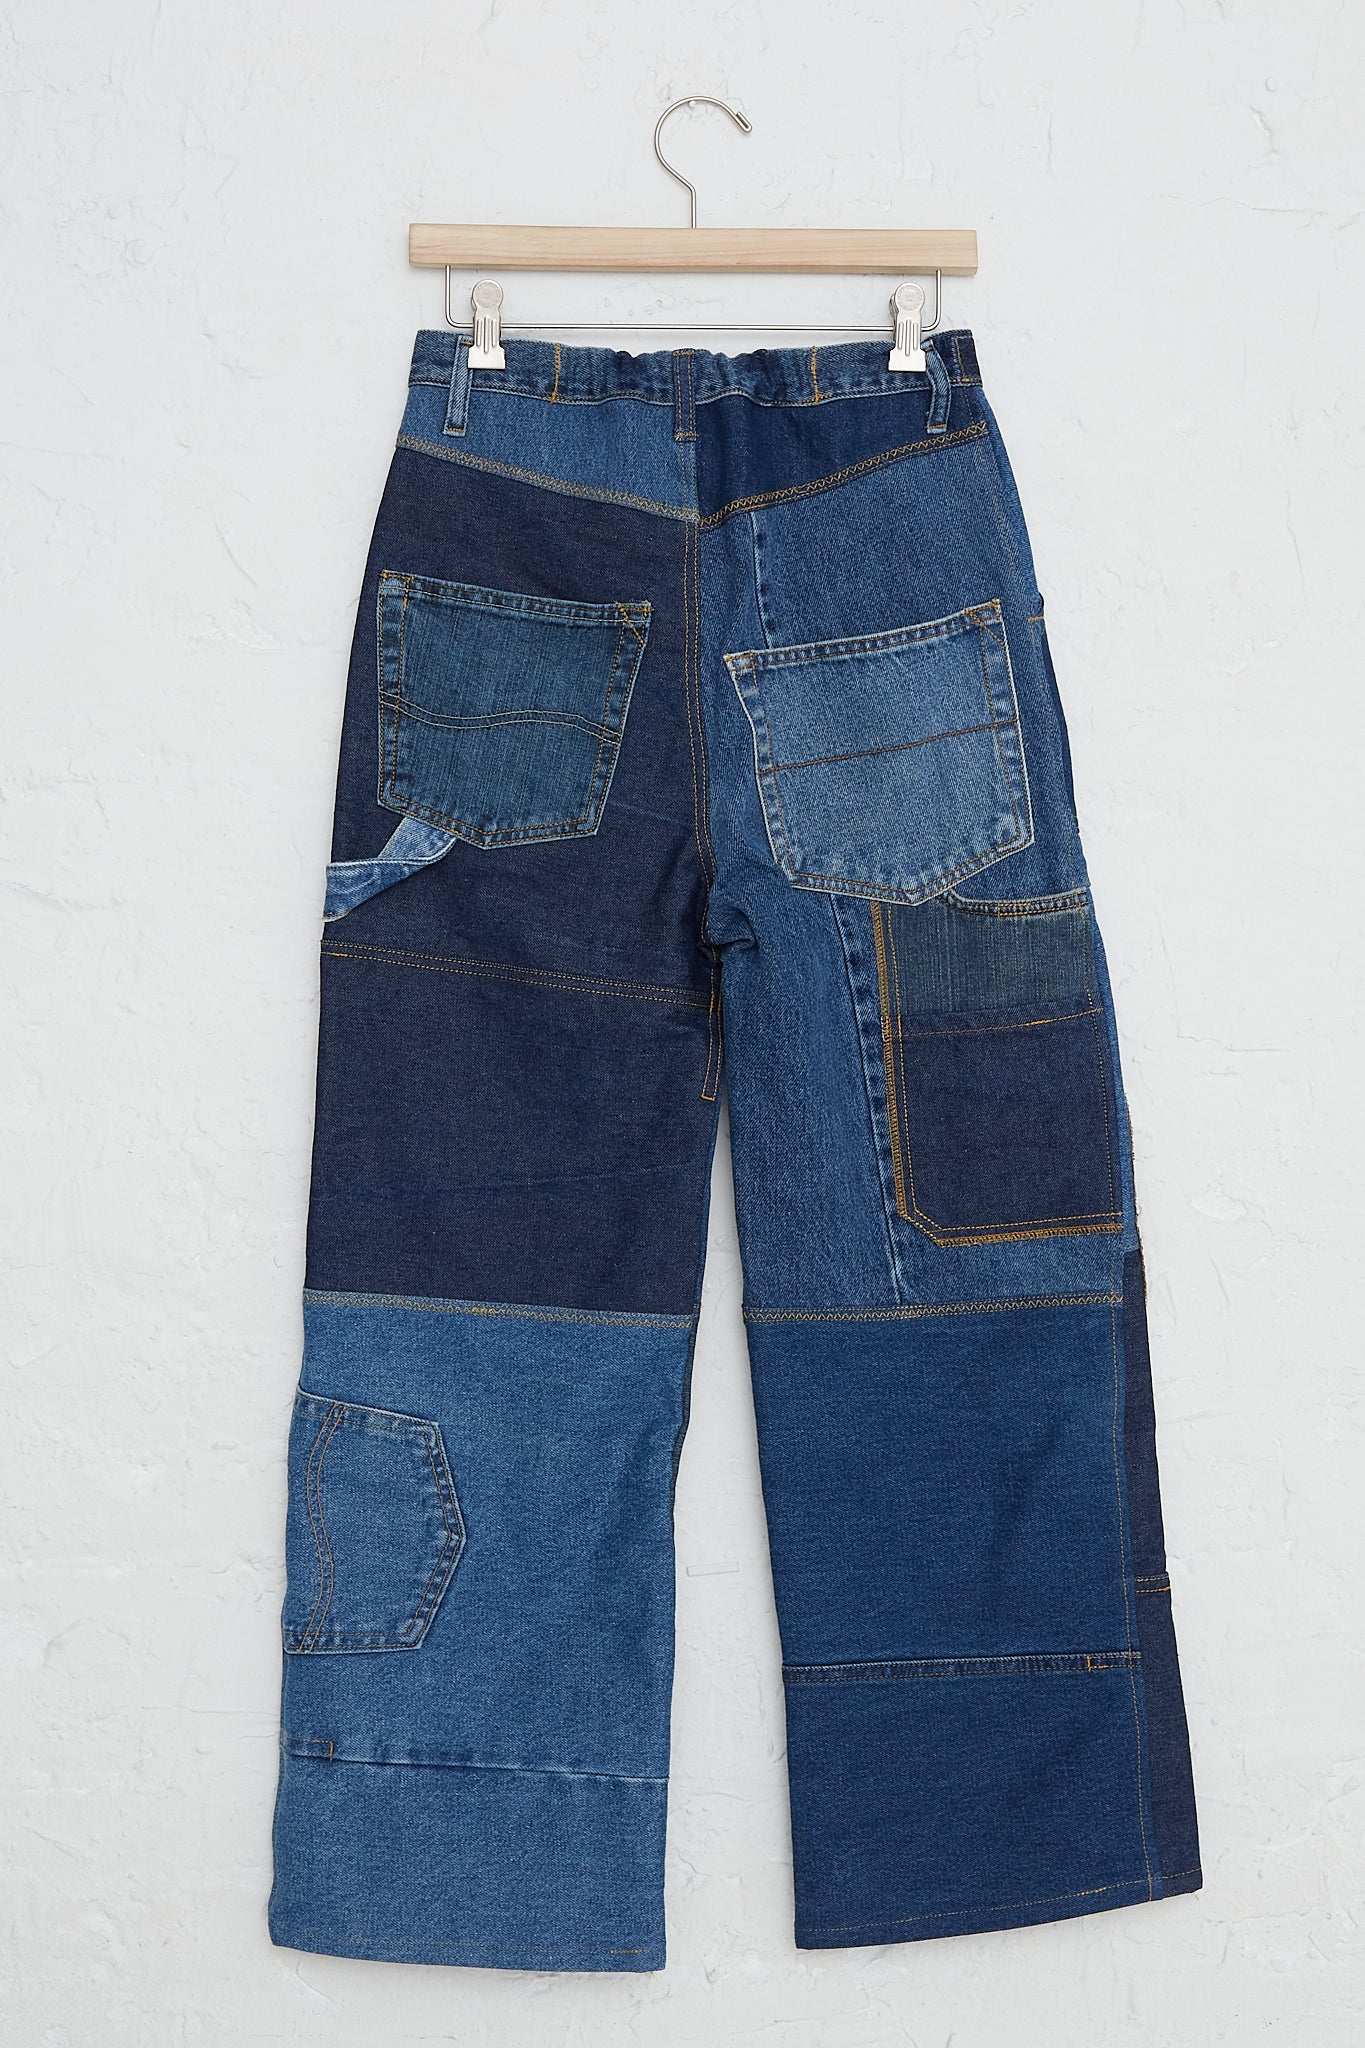 WildRootz - Reworked Jeans in Blue Variation B  - S back view